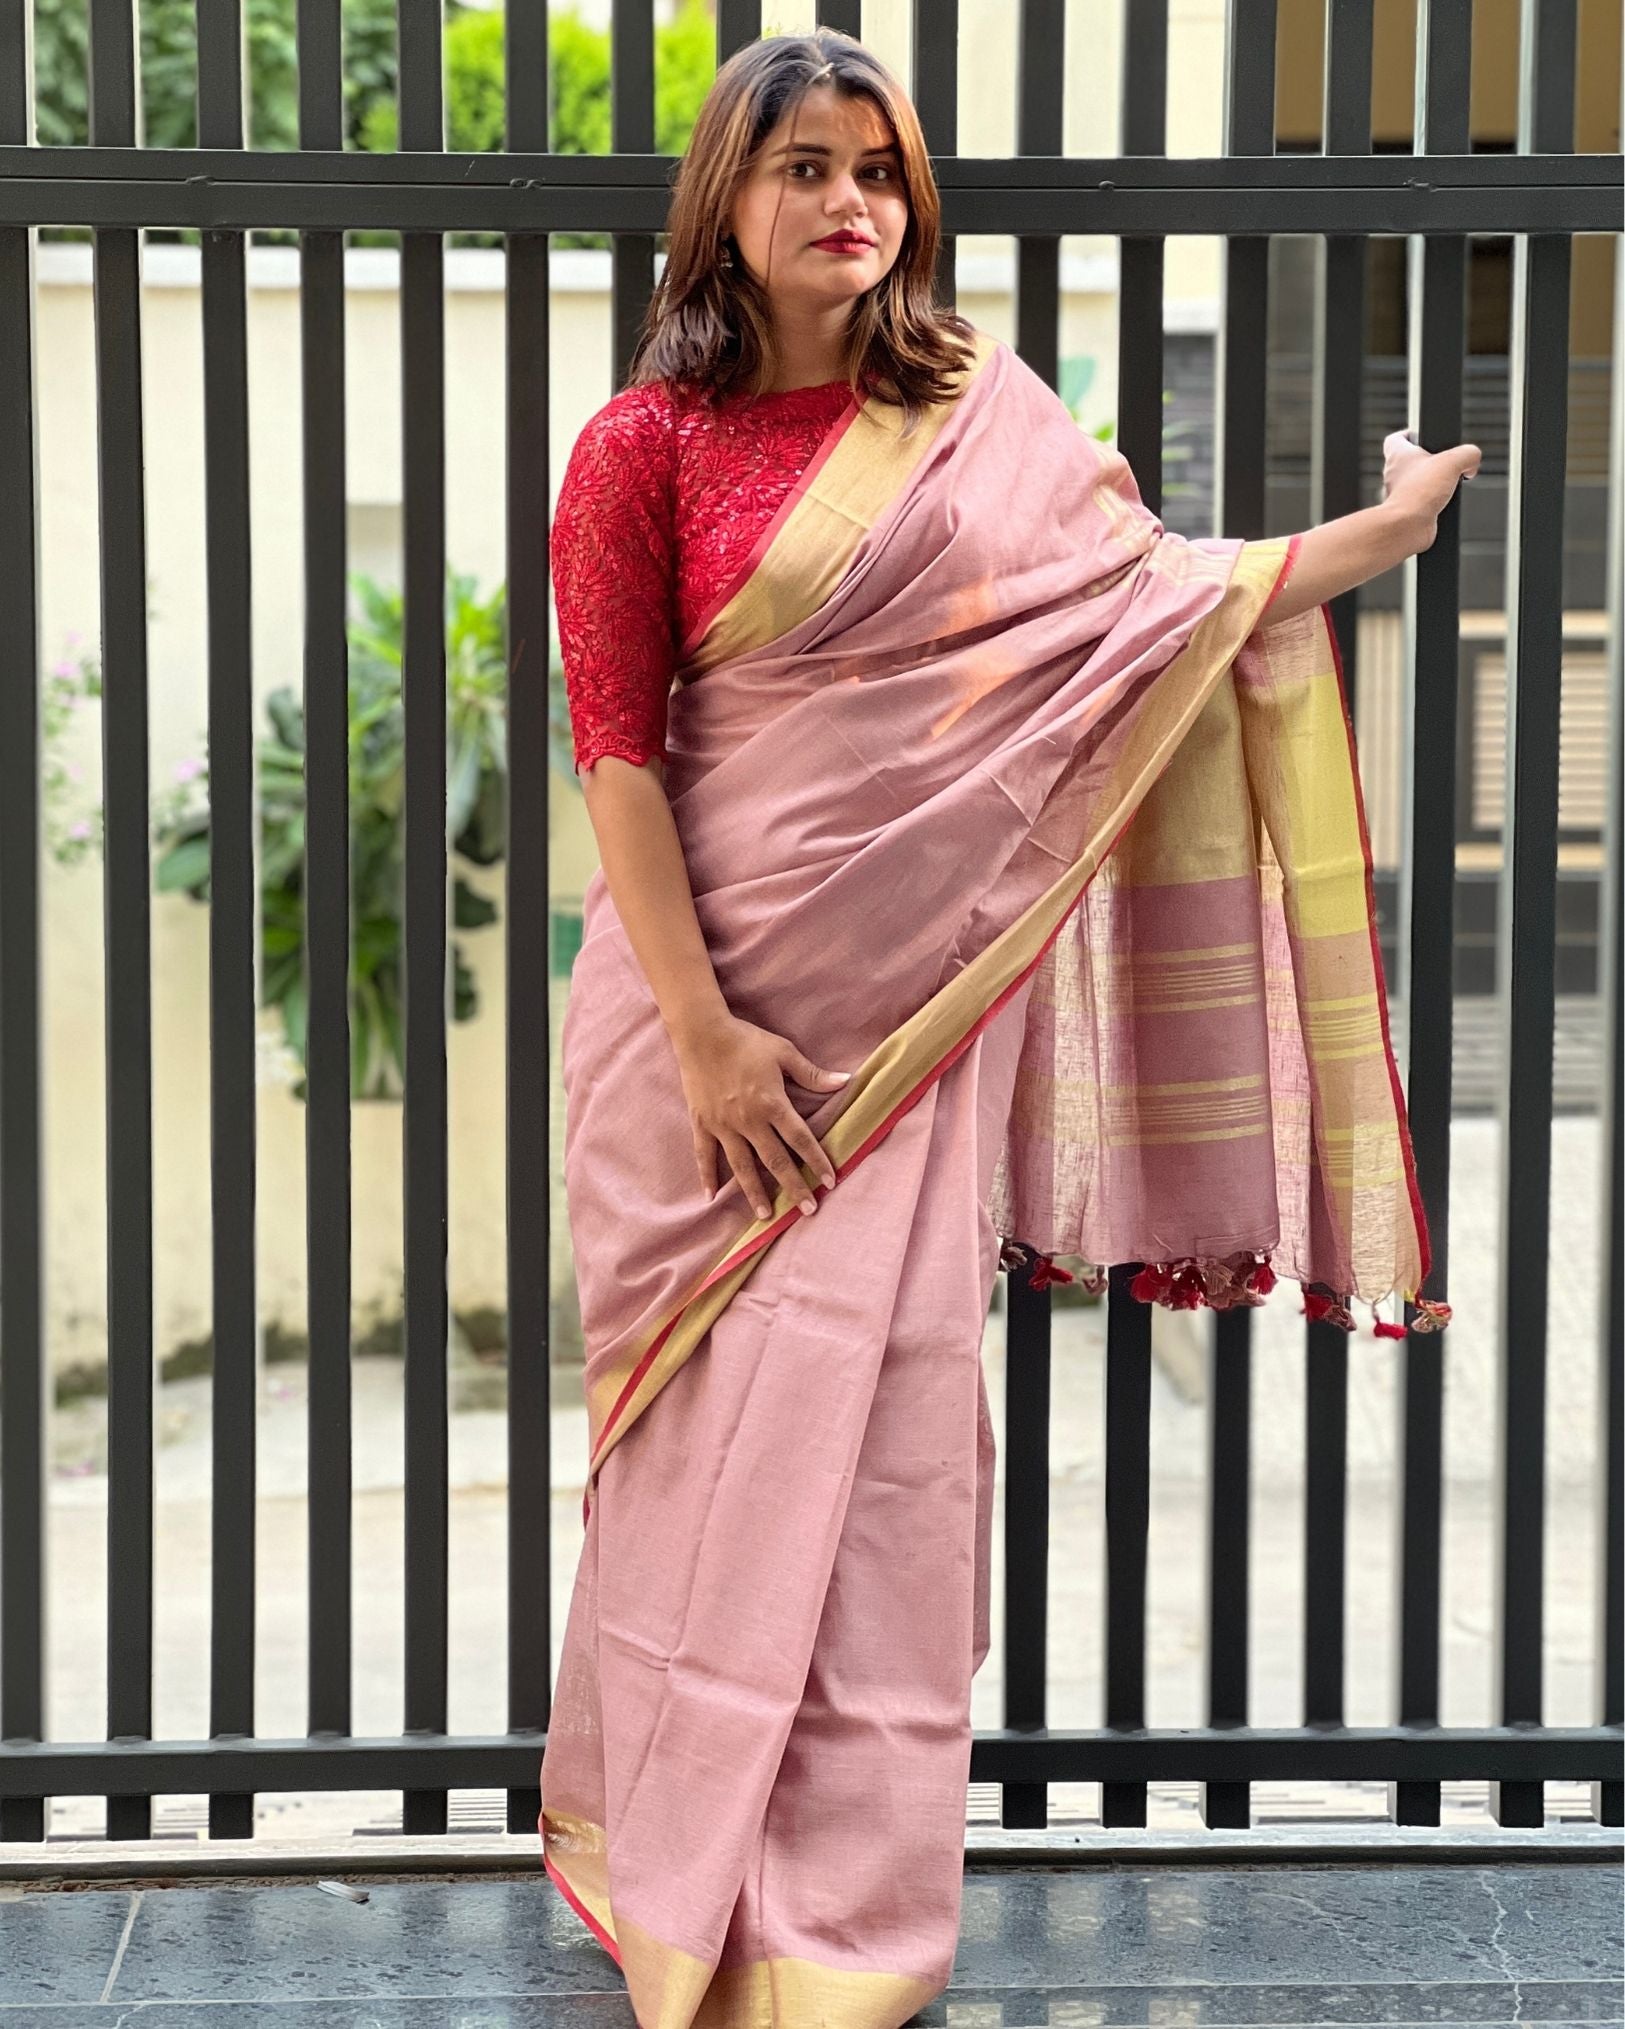 Handwoven Pure Linen Saree Dusky Pink Color with running Blouse - IndieHaat